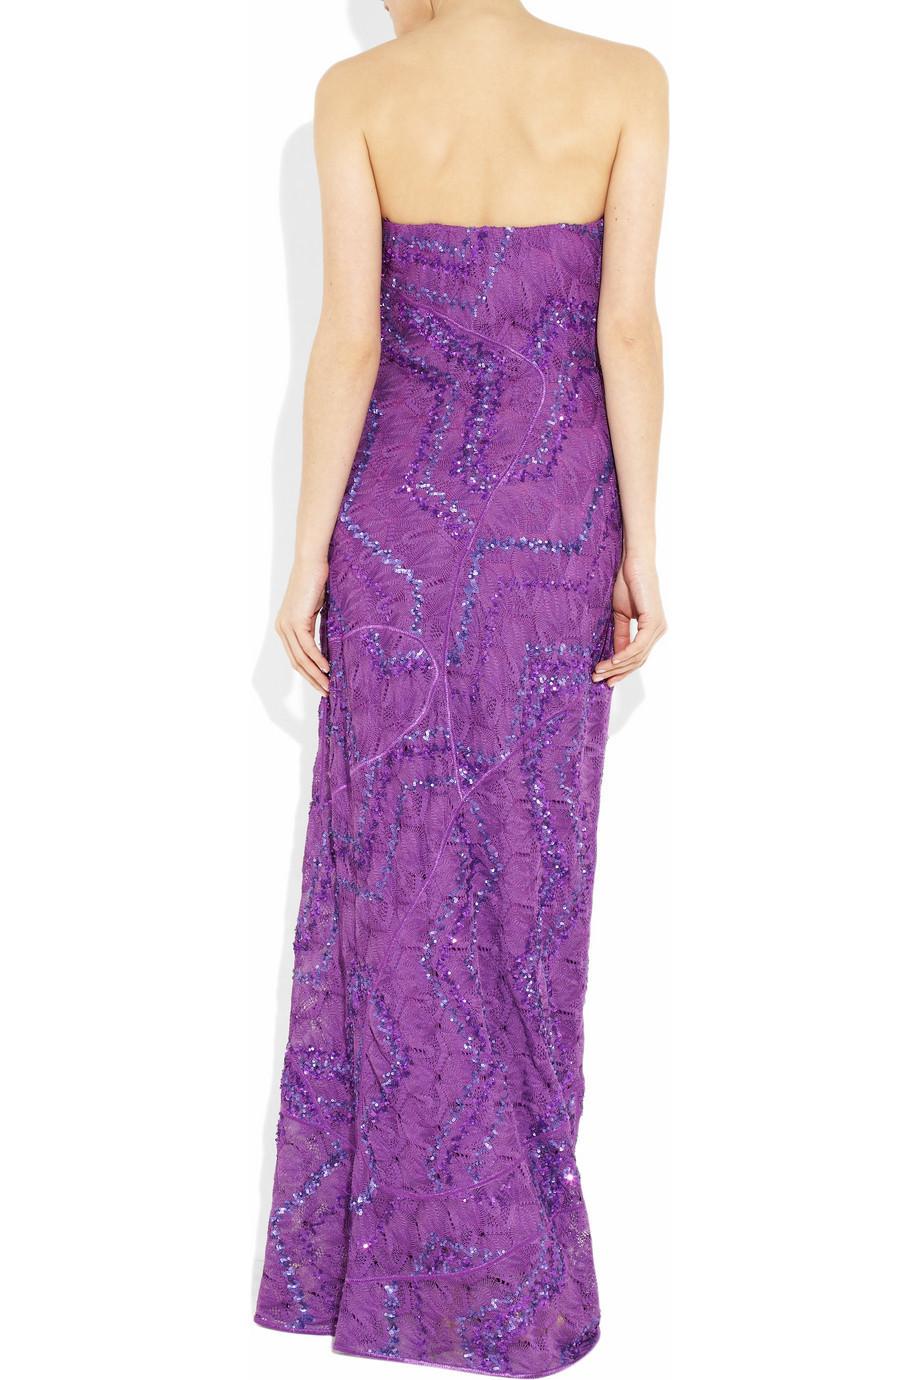 NEW Missoni Purple Embroidered Crochet Knit Evening Gown Maxi Dress 42 For Sale 2